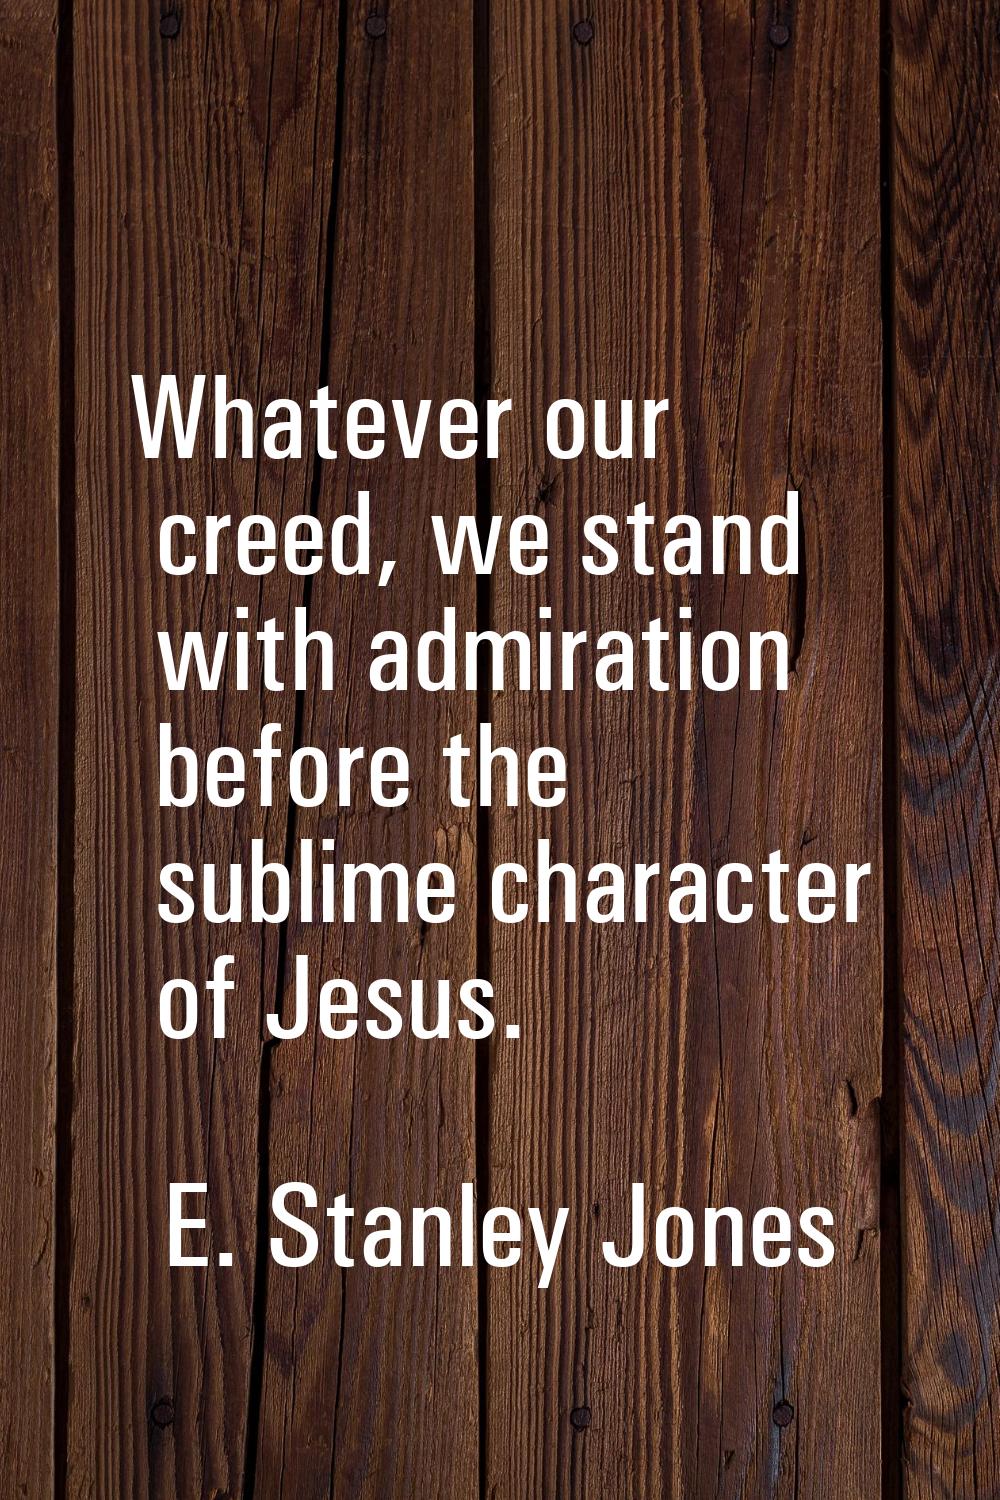 Whatever our creed, we stand with admiration before the sublime character of Jesus.